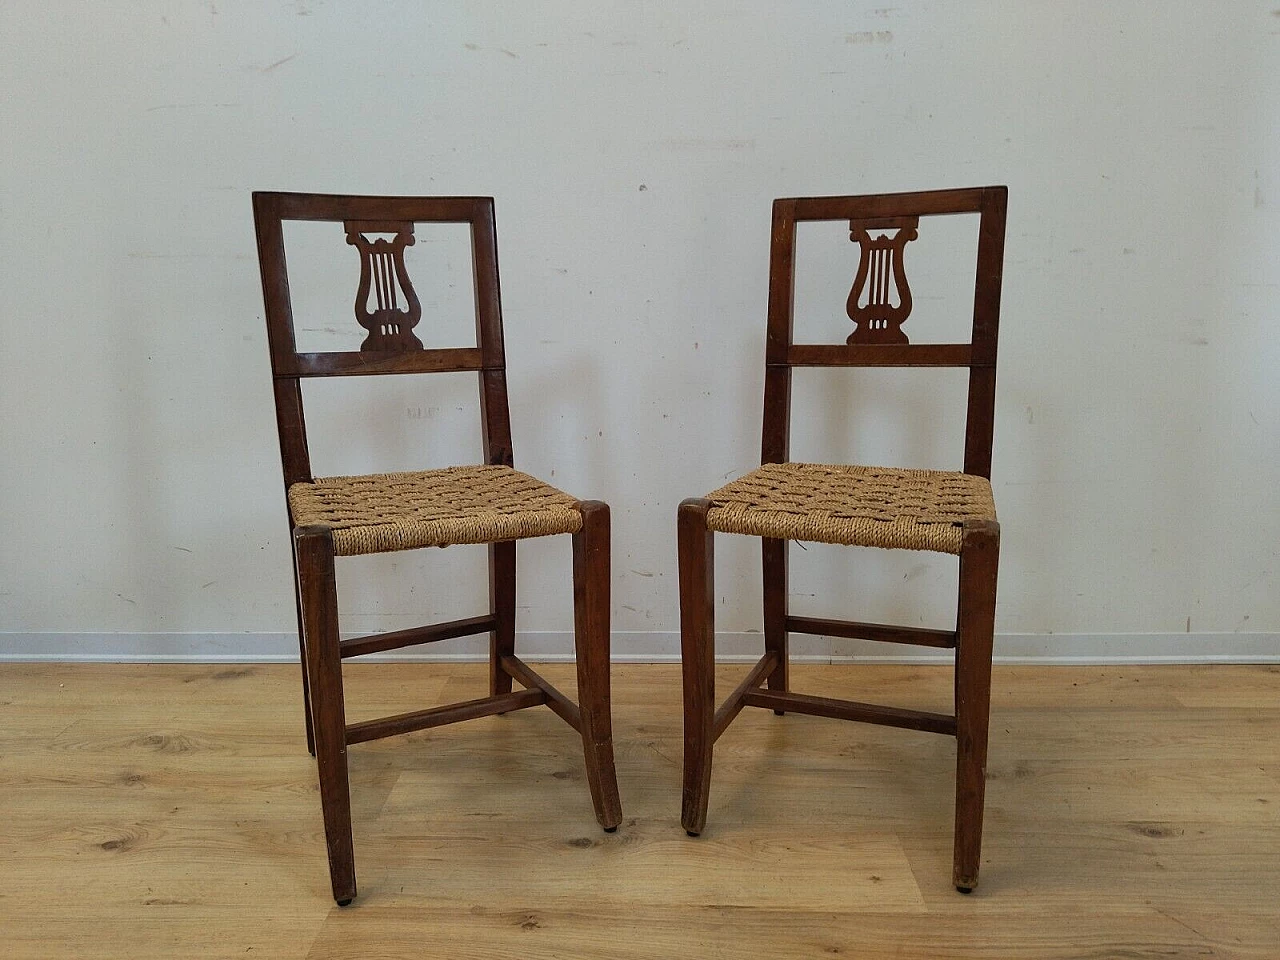 Pair of Empire solid walnut and straw chairs, early 19th century 9